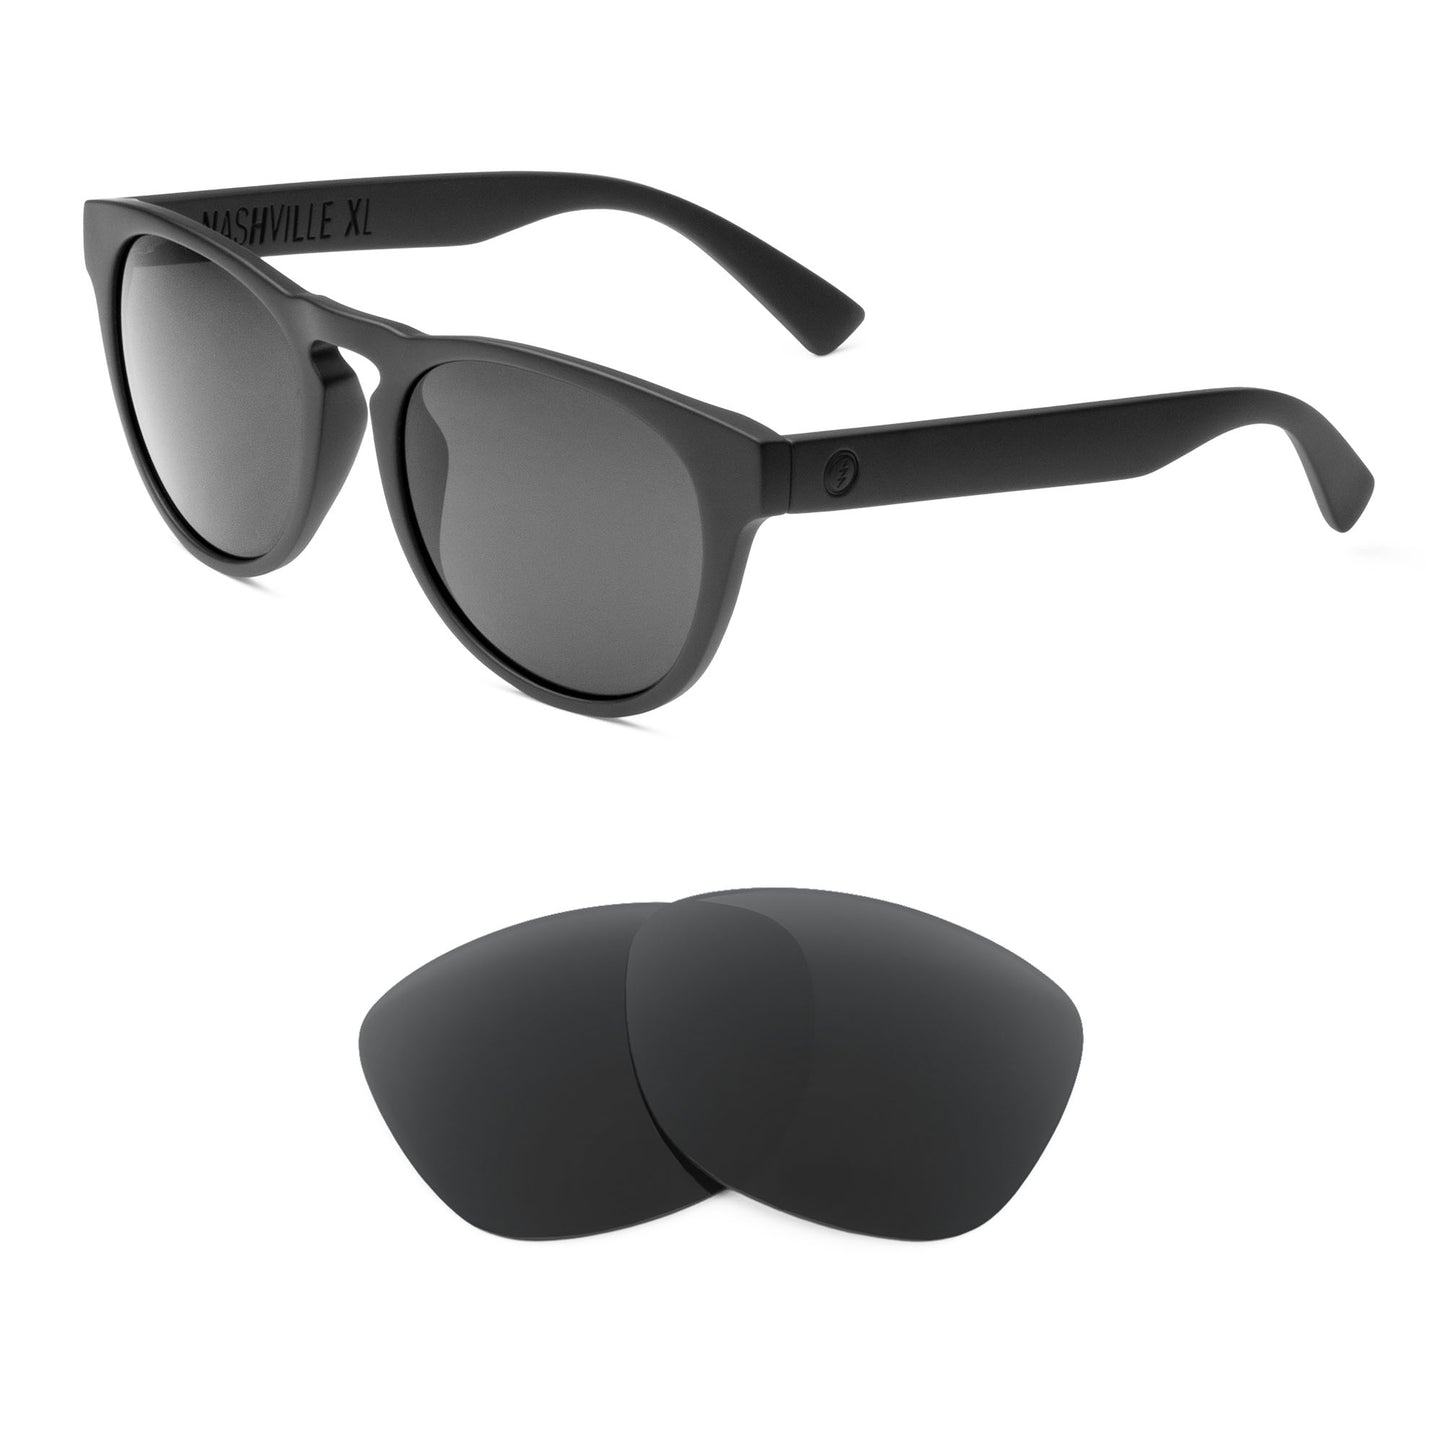 Electric Nashville XL sunglasses with replacement lenses